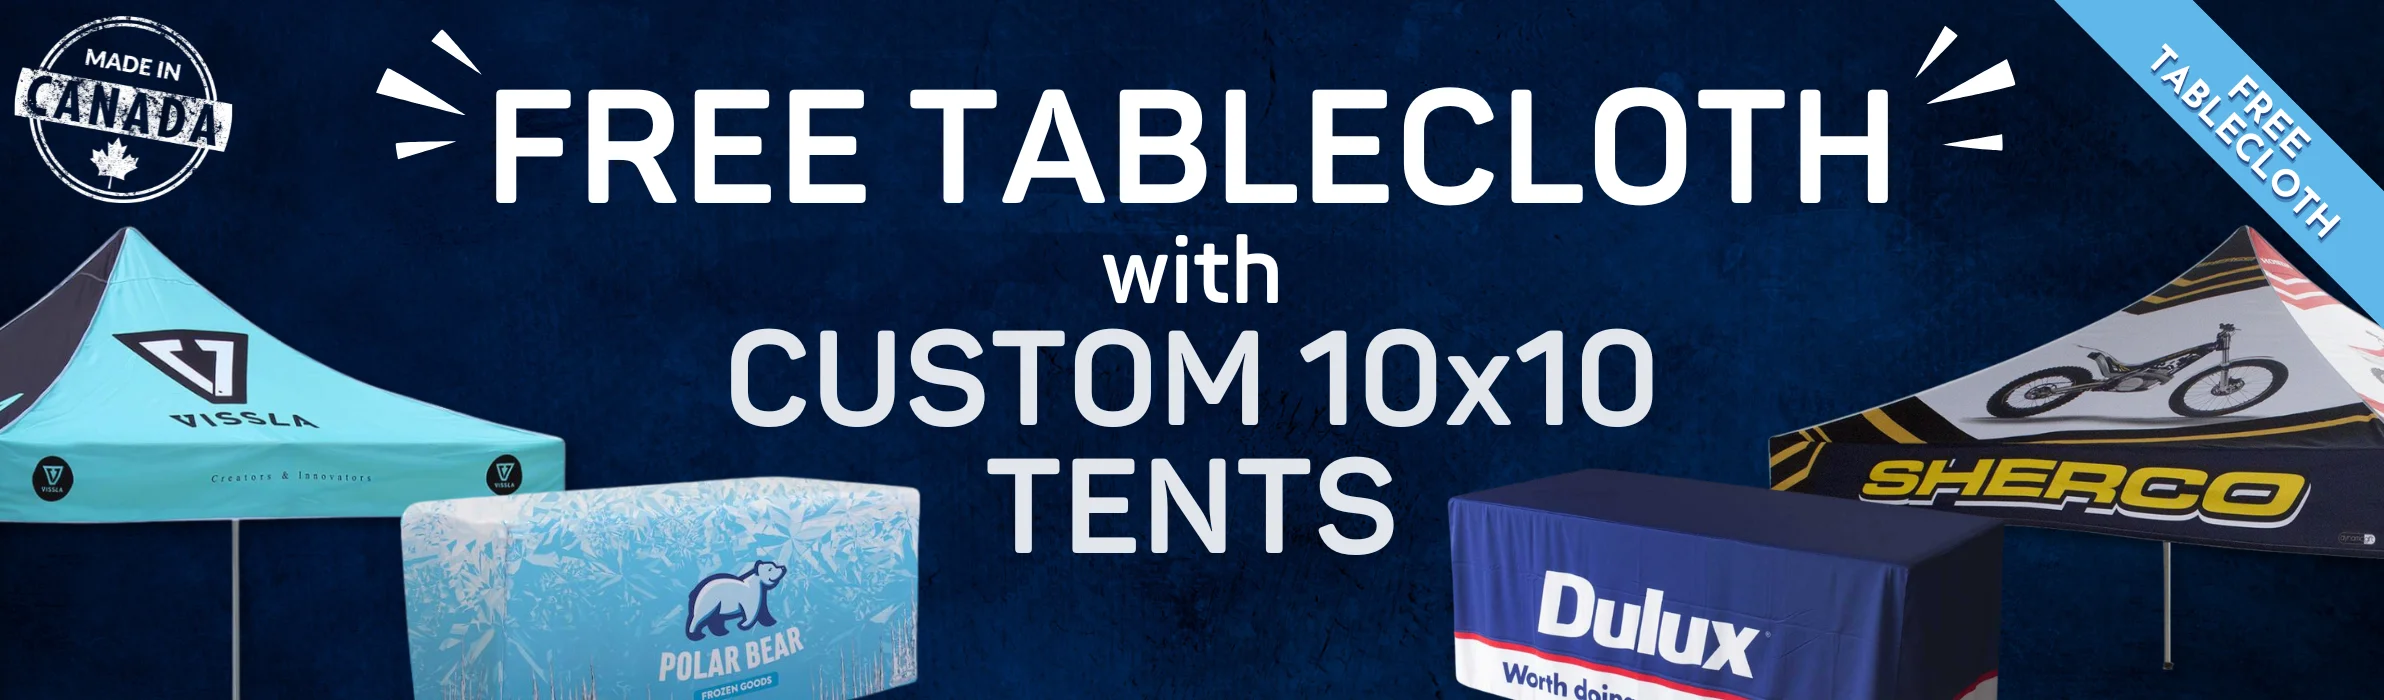 Custom Pop Up Tents with a FREE 6ft Tablecloth, for a Limited Time Only! Get Trade Show Ready with Fully Customizable Event Tents for Great Brand Visibility.